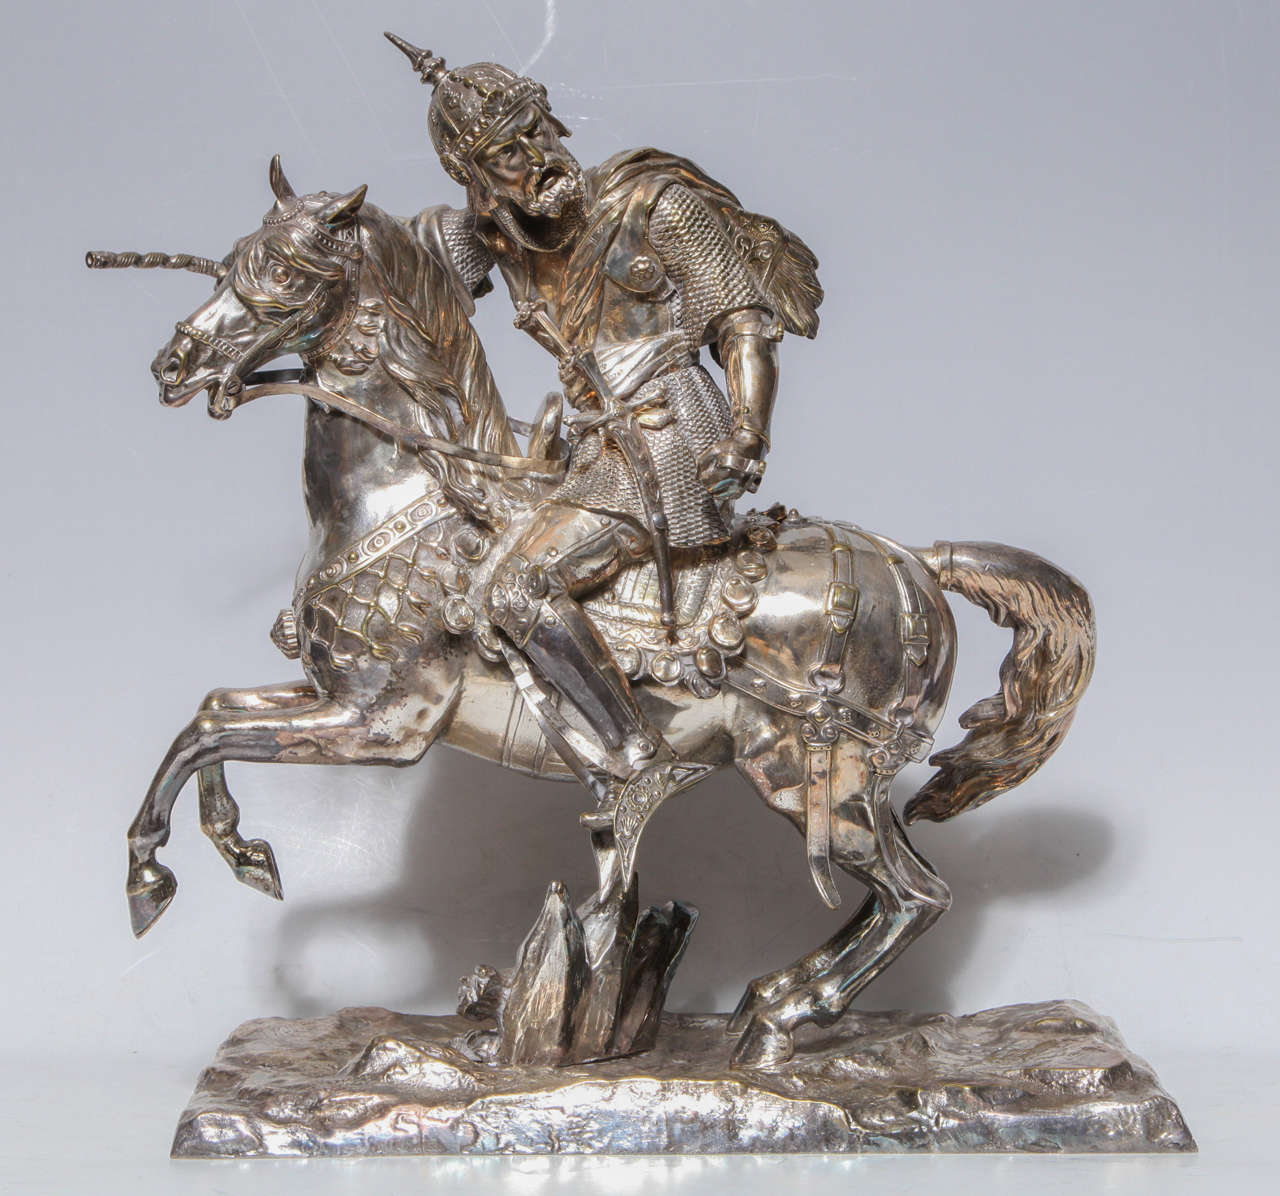 Pair of silvered bronze groups of equestrian fighting knights on horses. These groups capture the moment of tension before the knights cross weapons. The horses rear up on their hind legs and toss their heads while the knights heroically remain in